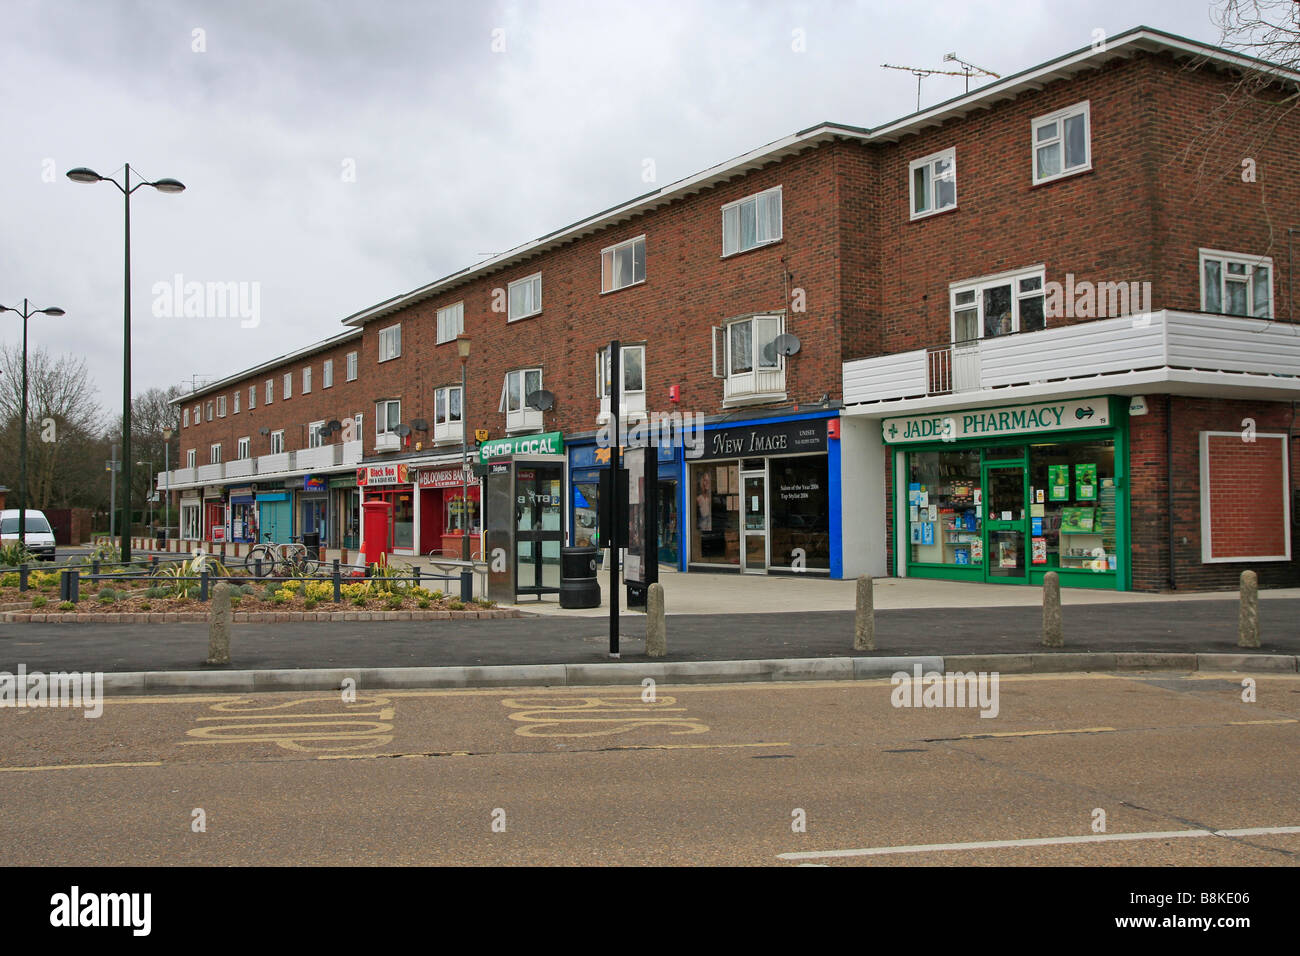 Shops Uk 1950s High Resolution Stock Photography and Images - Alamy